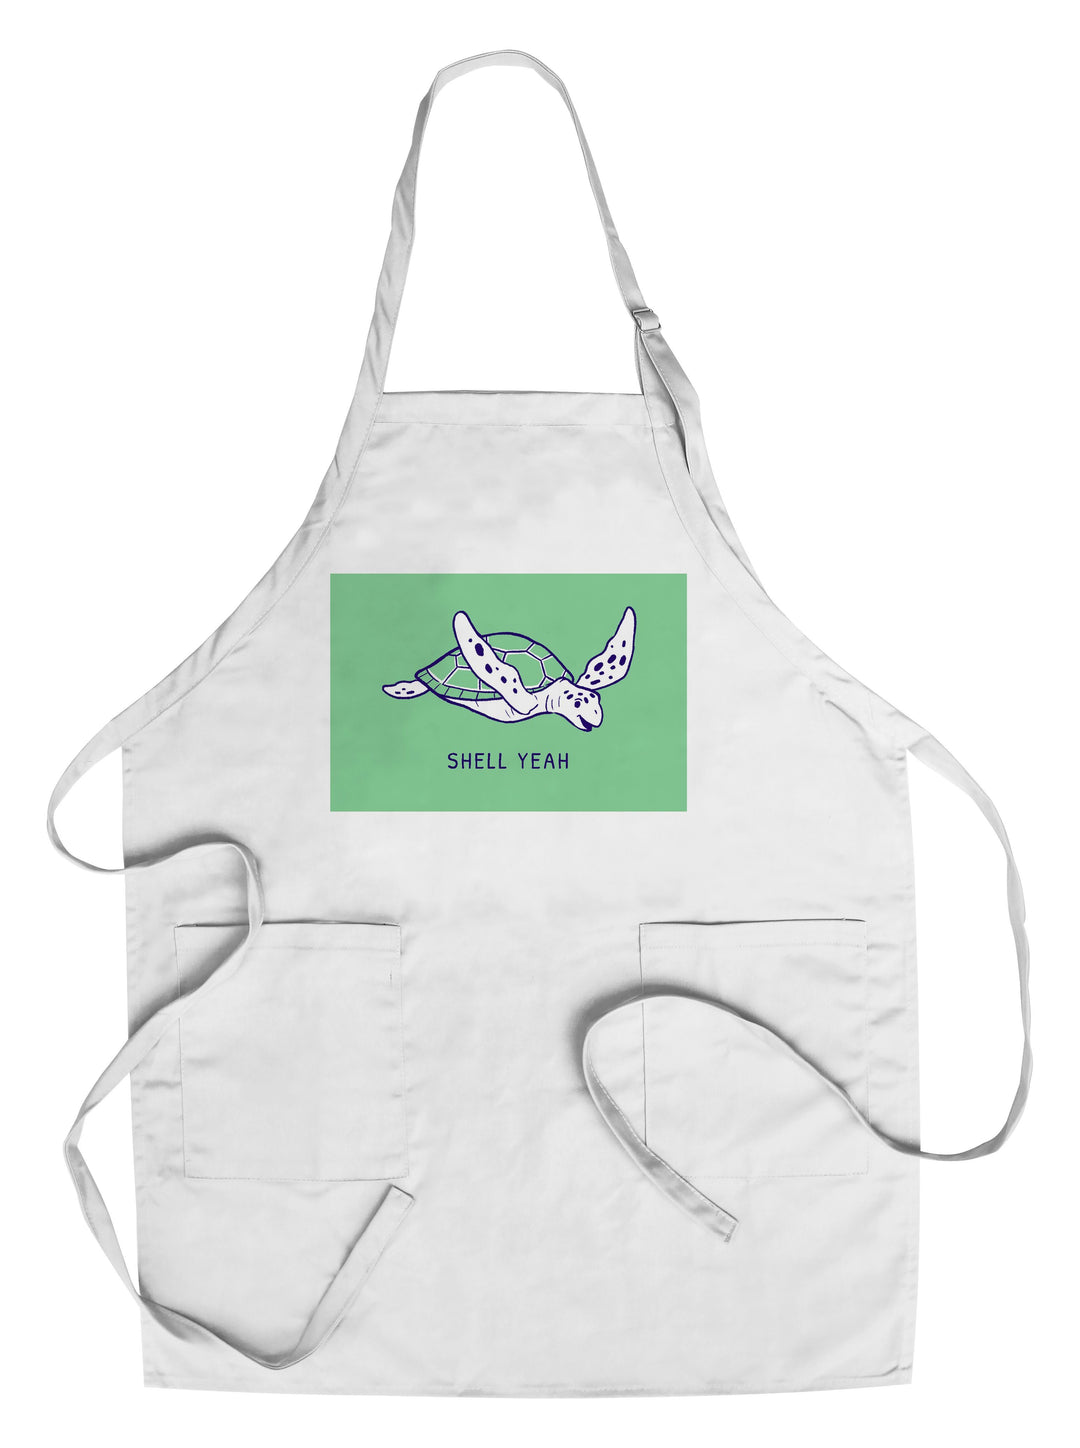 Humorous Animals Collection, Sea Turtle, Shell Yeah, Towels and Aprons Kitchen Lantern Press Chef's Apron 